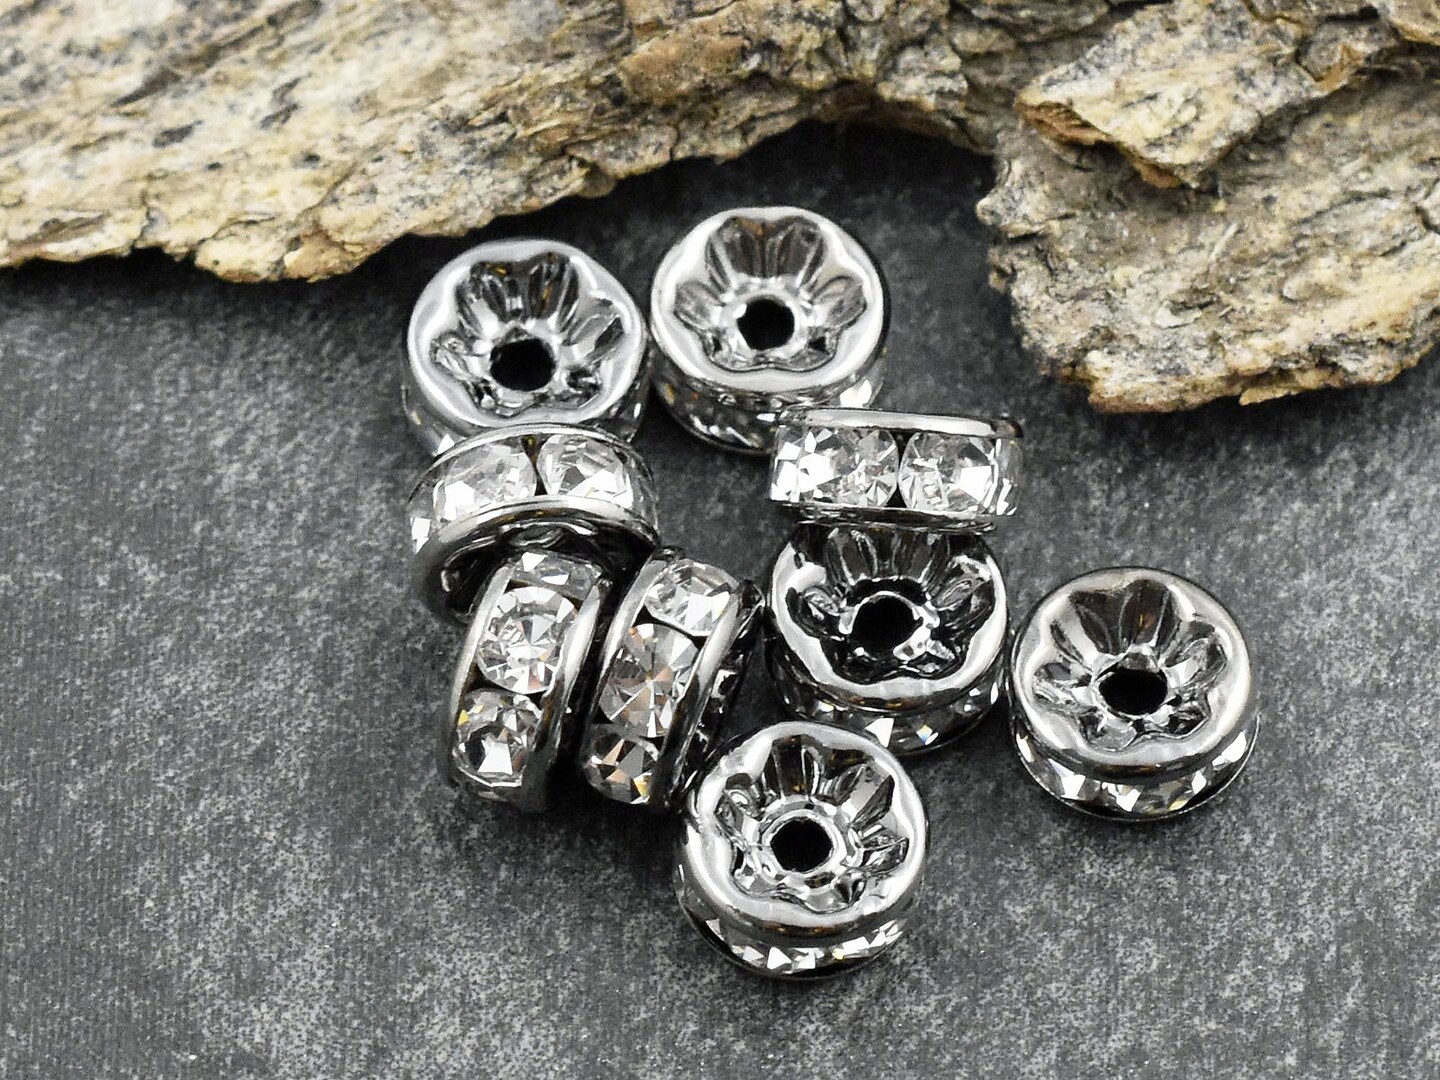 Silver Plated Jewelry Beads Clear Silver Rhinestone Beads Rondelle